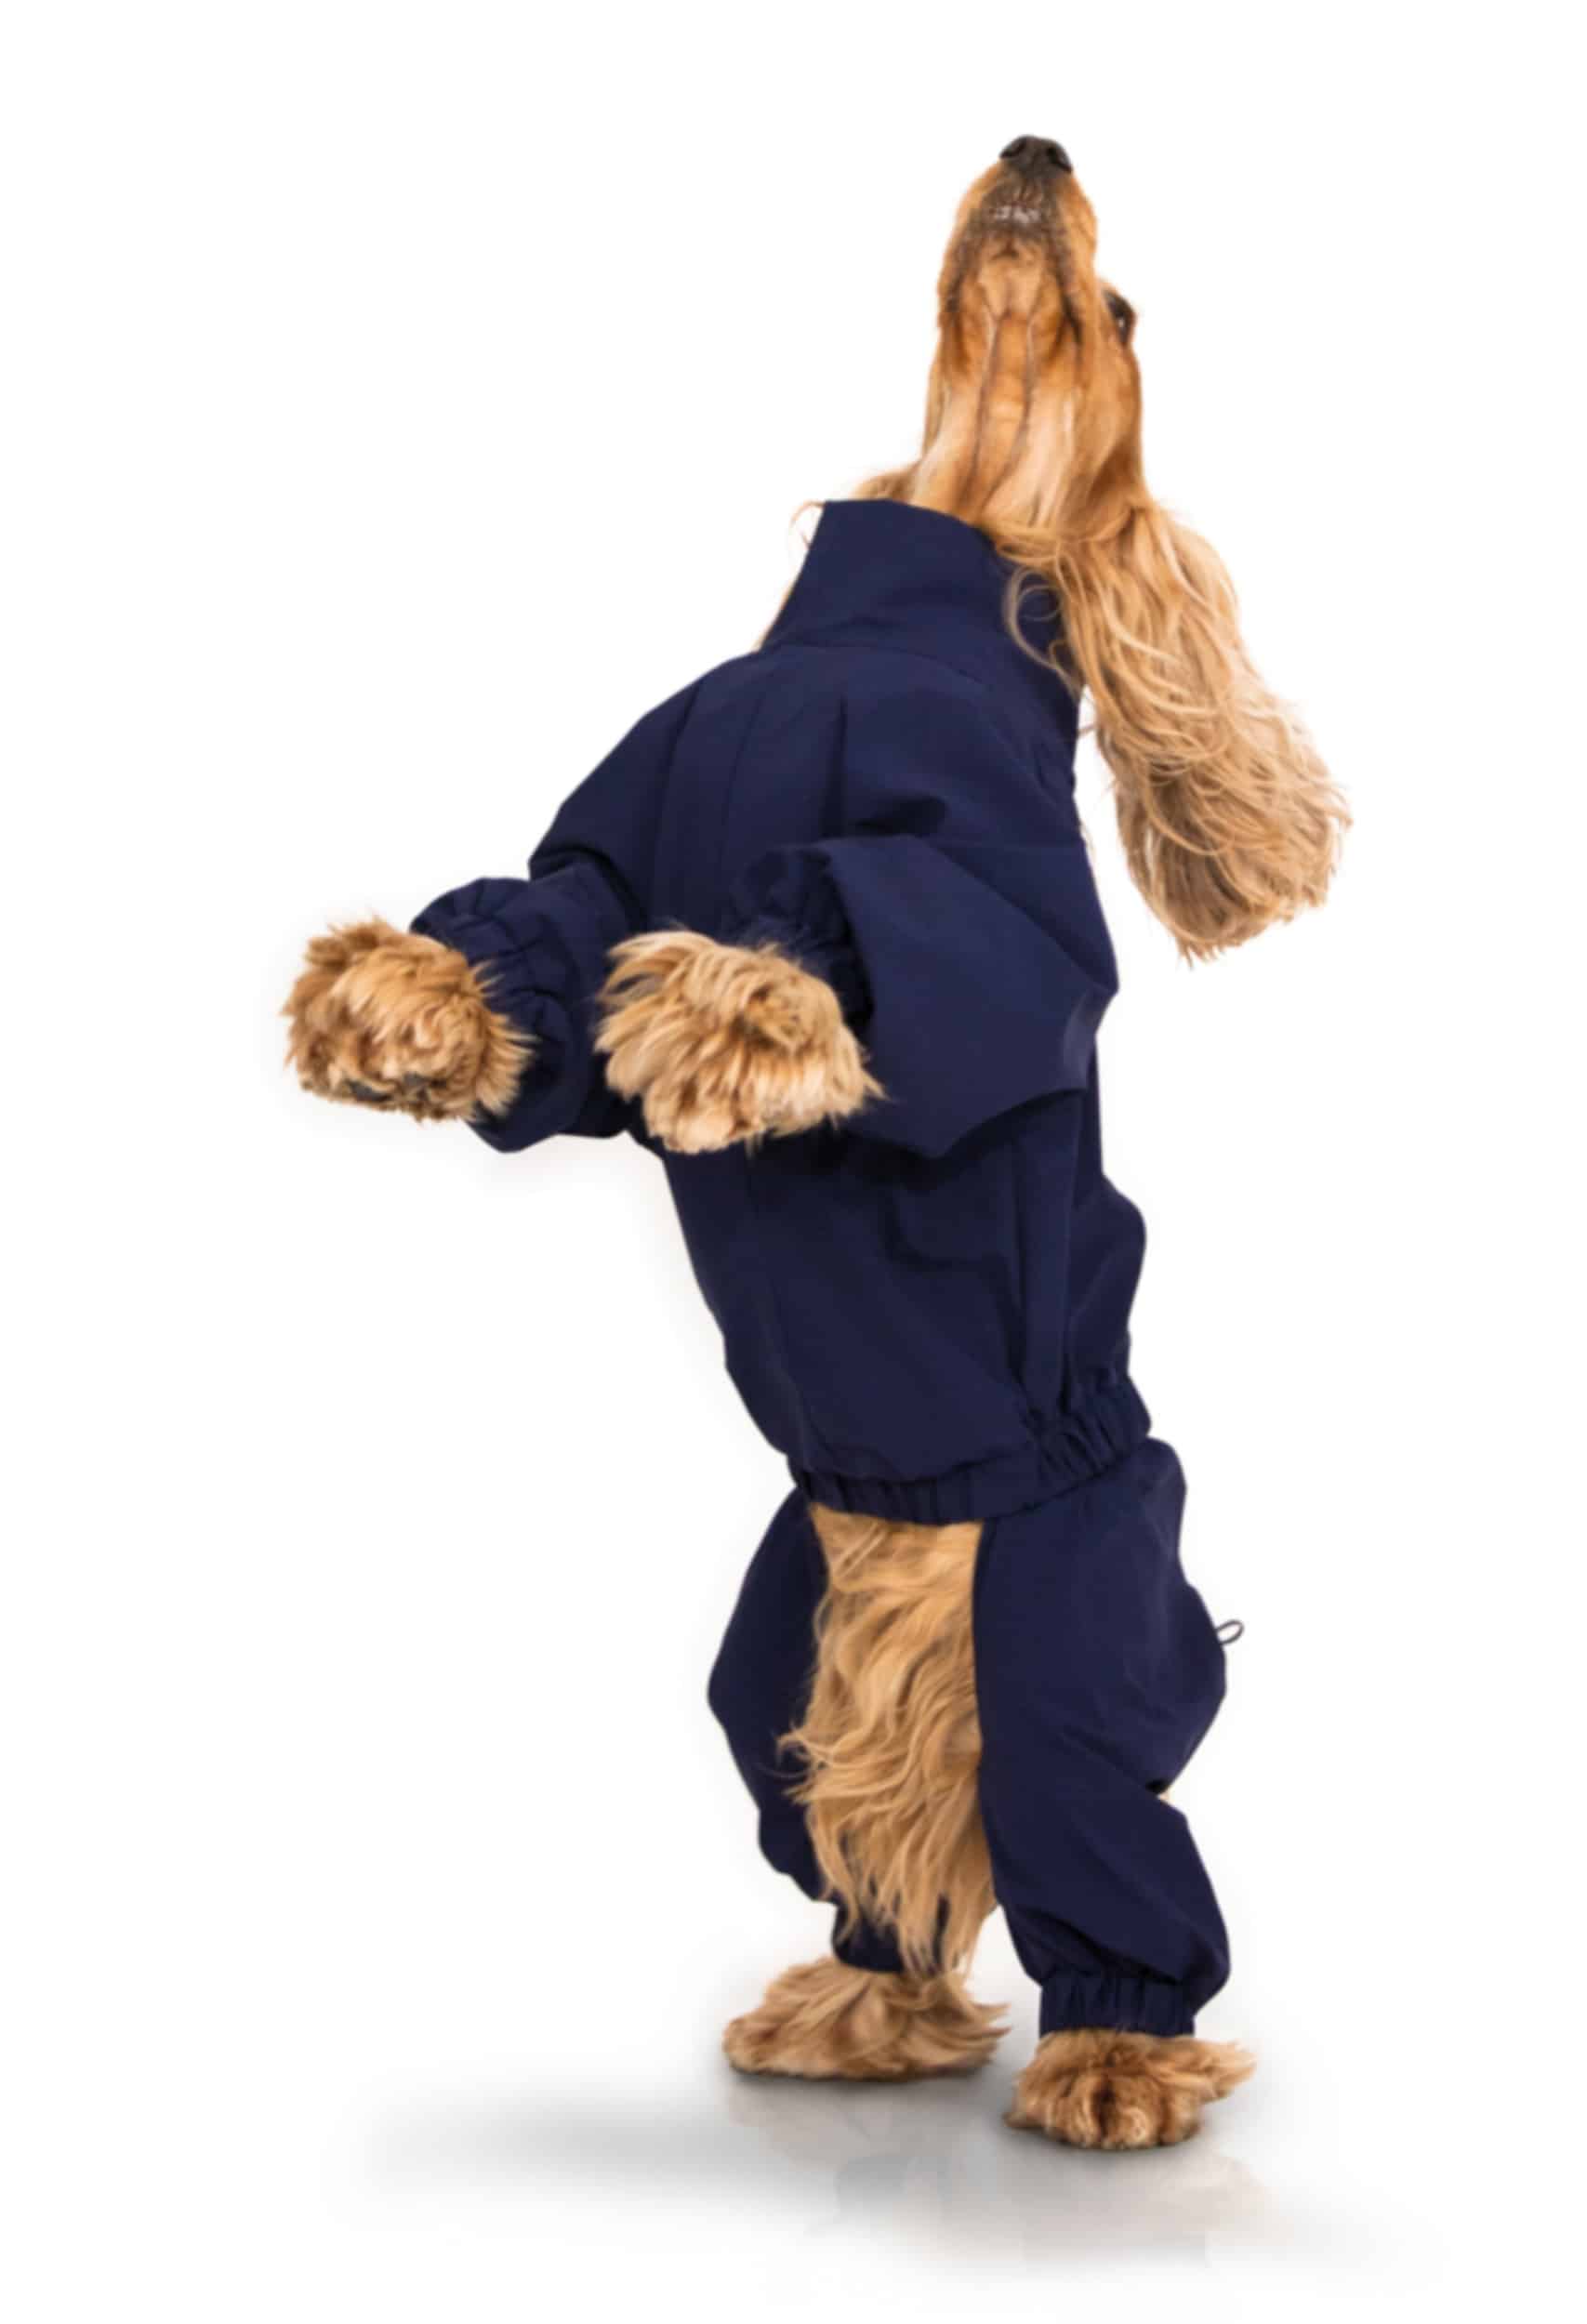 the waterproof suit for dogs